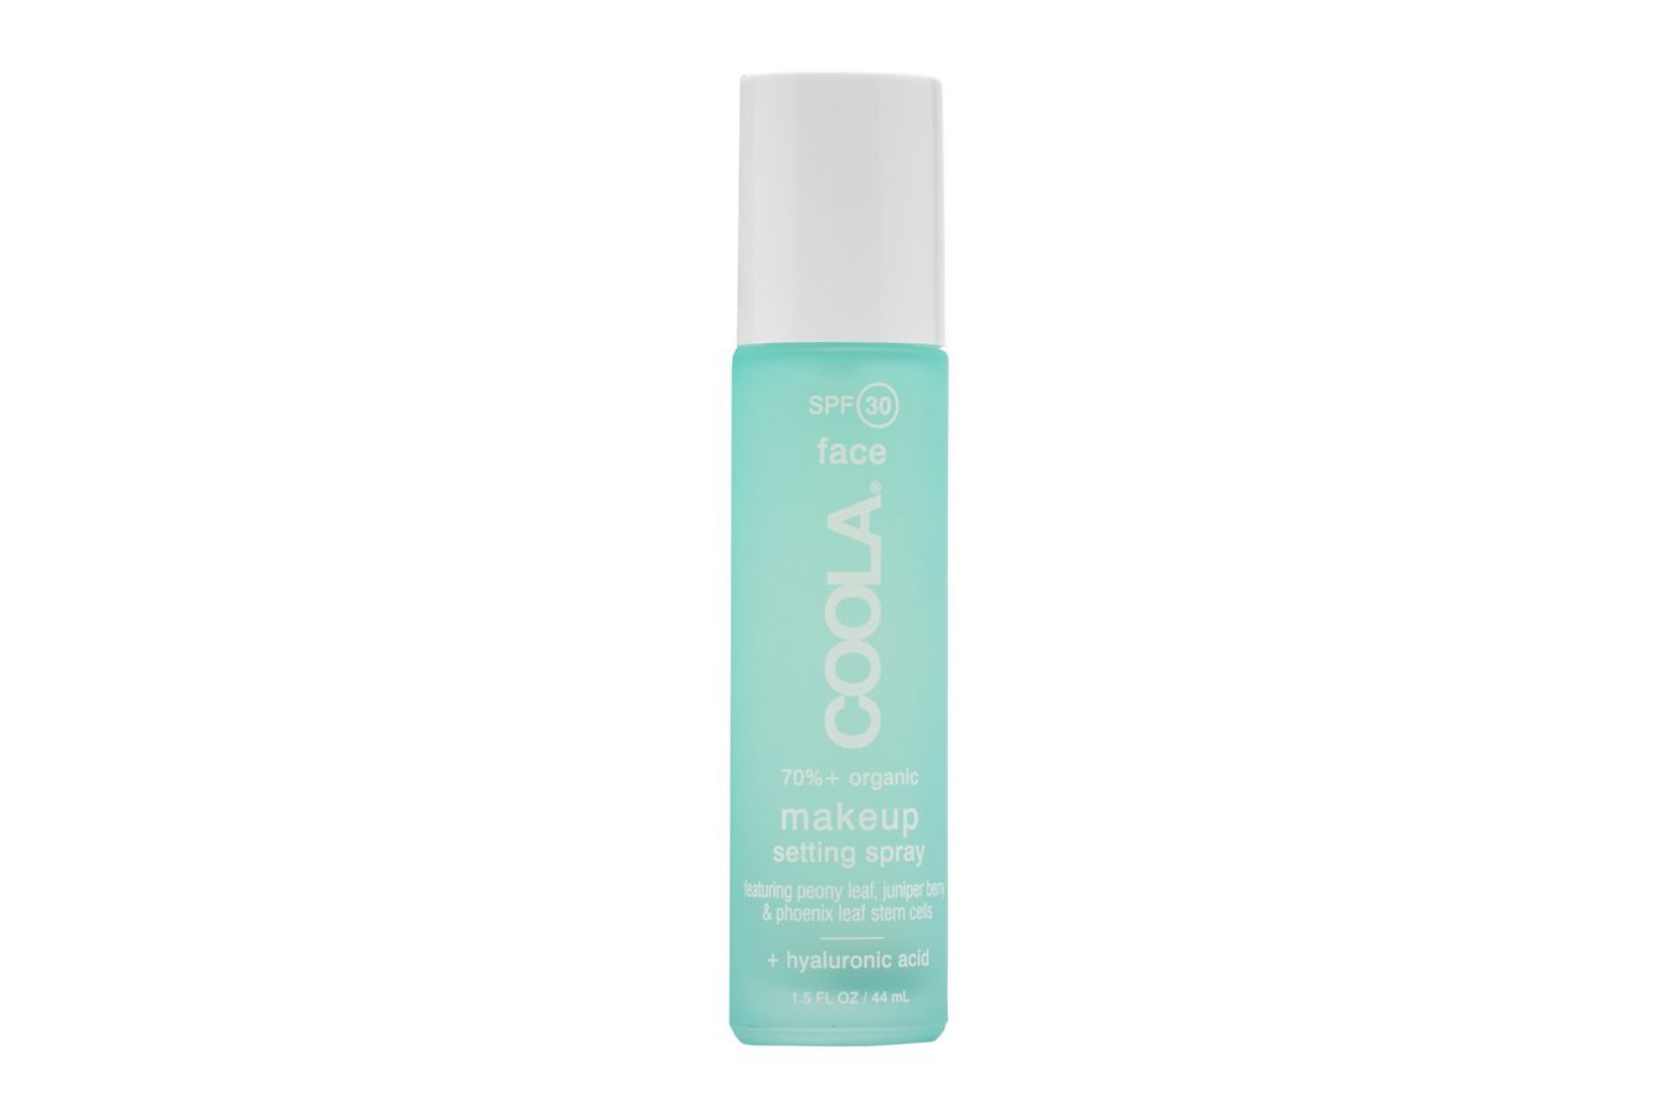 does coola sunscreen expire